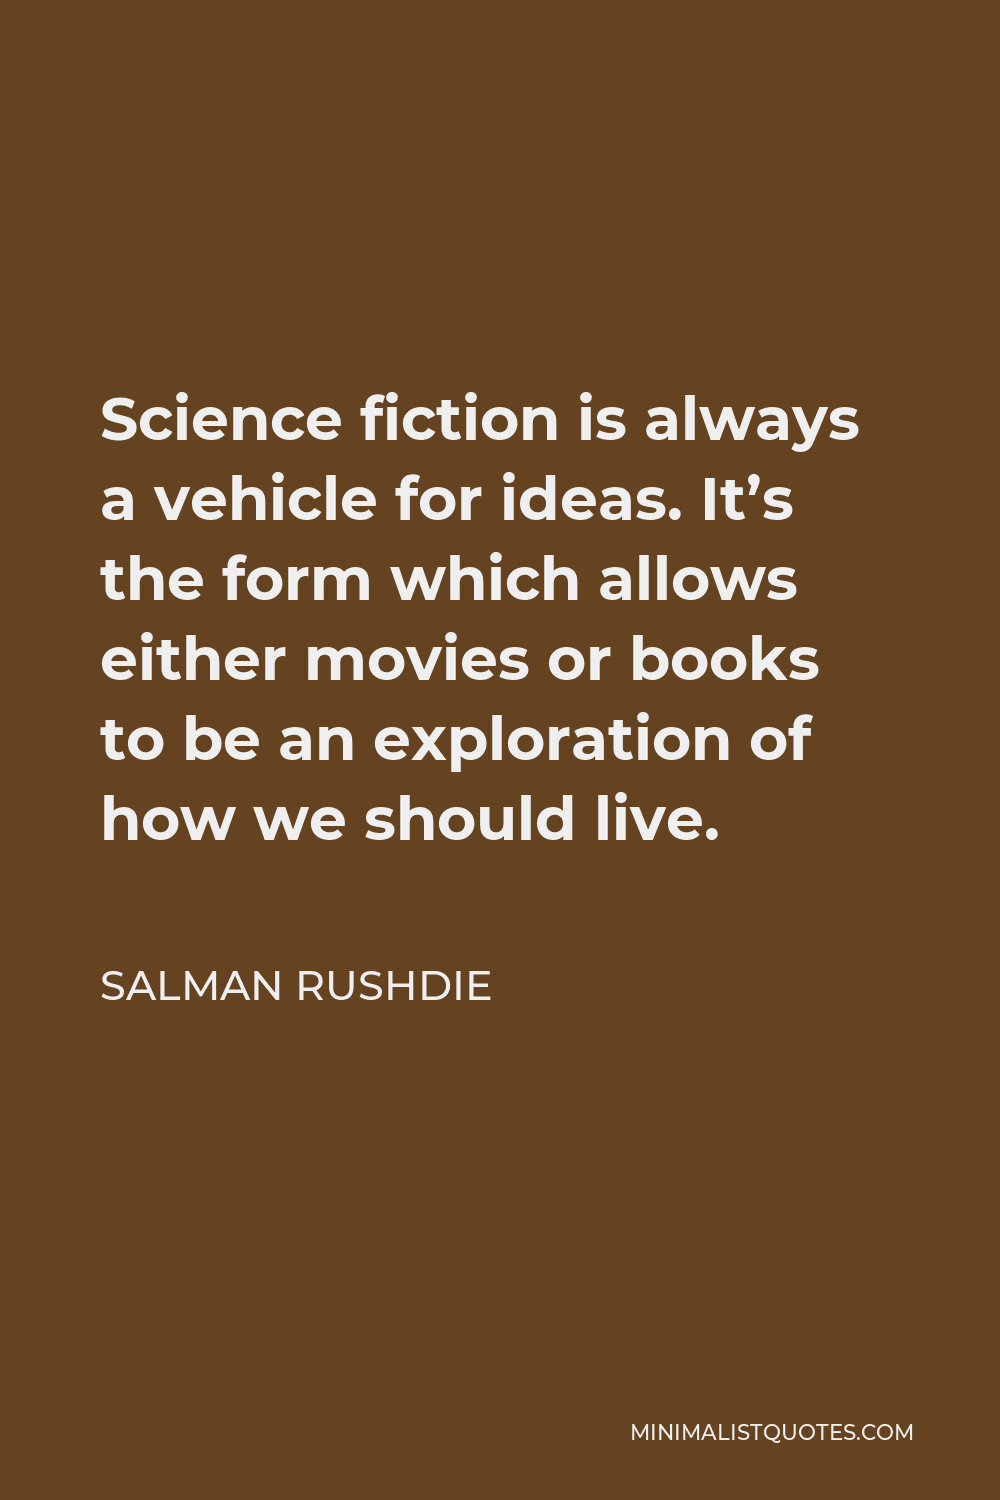 Salman Rushdie Quote - Science fiction is always a vehicle for ideas. It’s the form which allows either movies or books to be an exploration of how we should live.